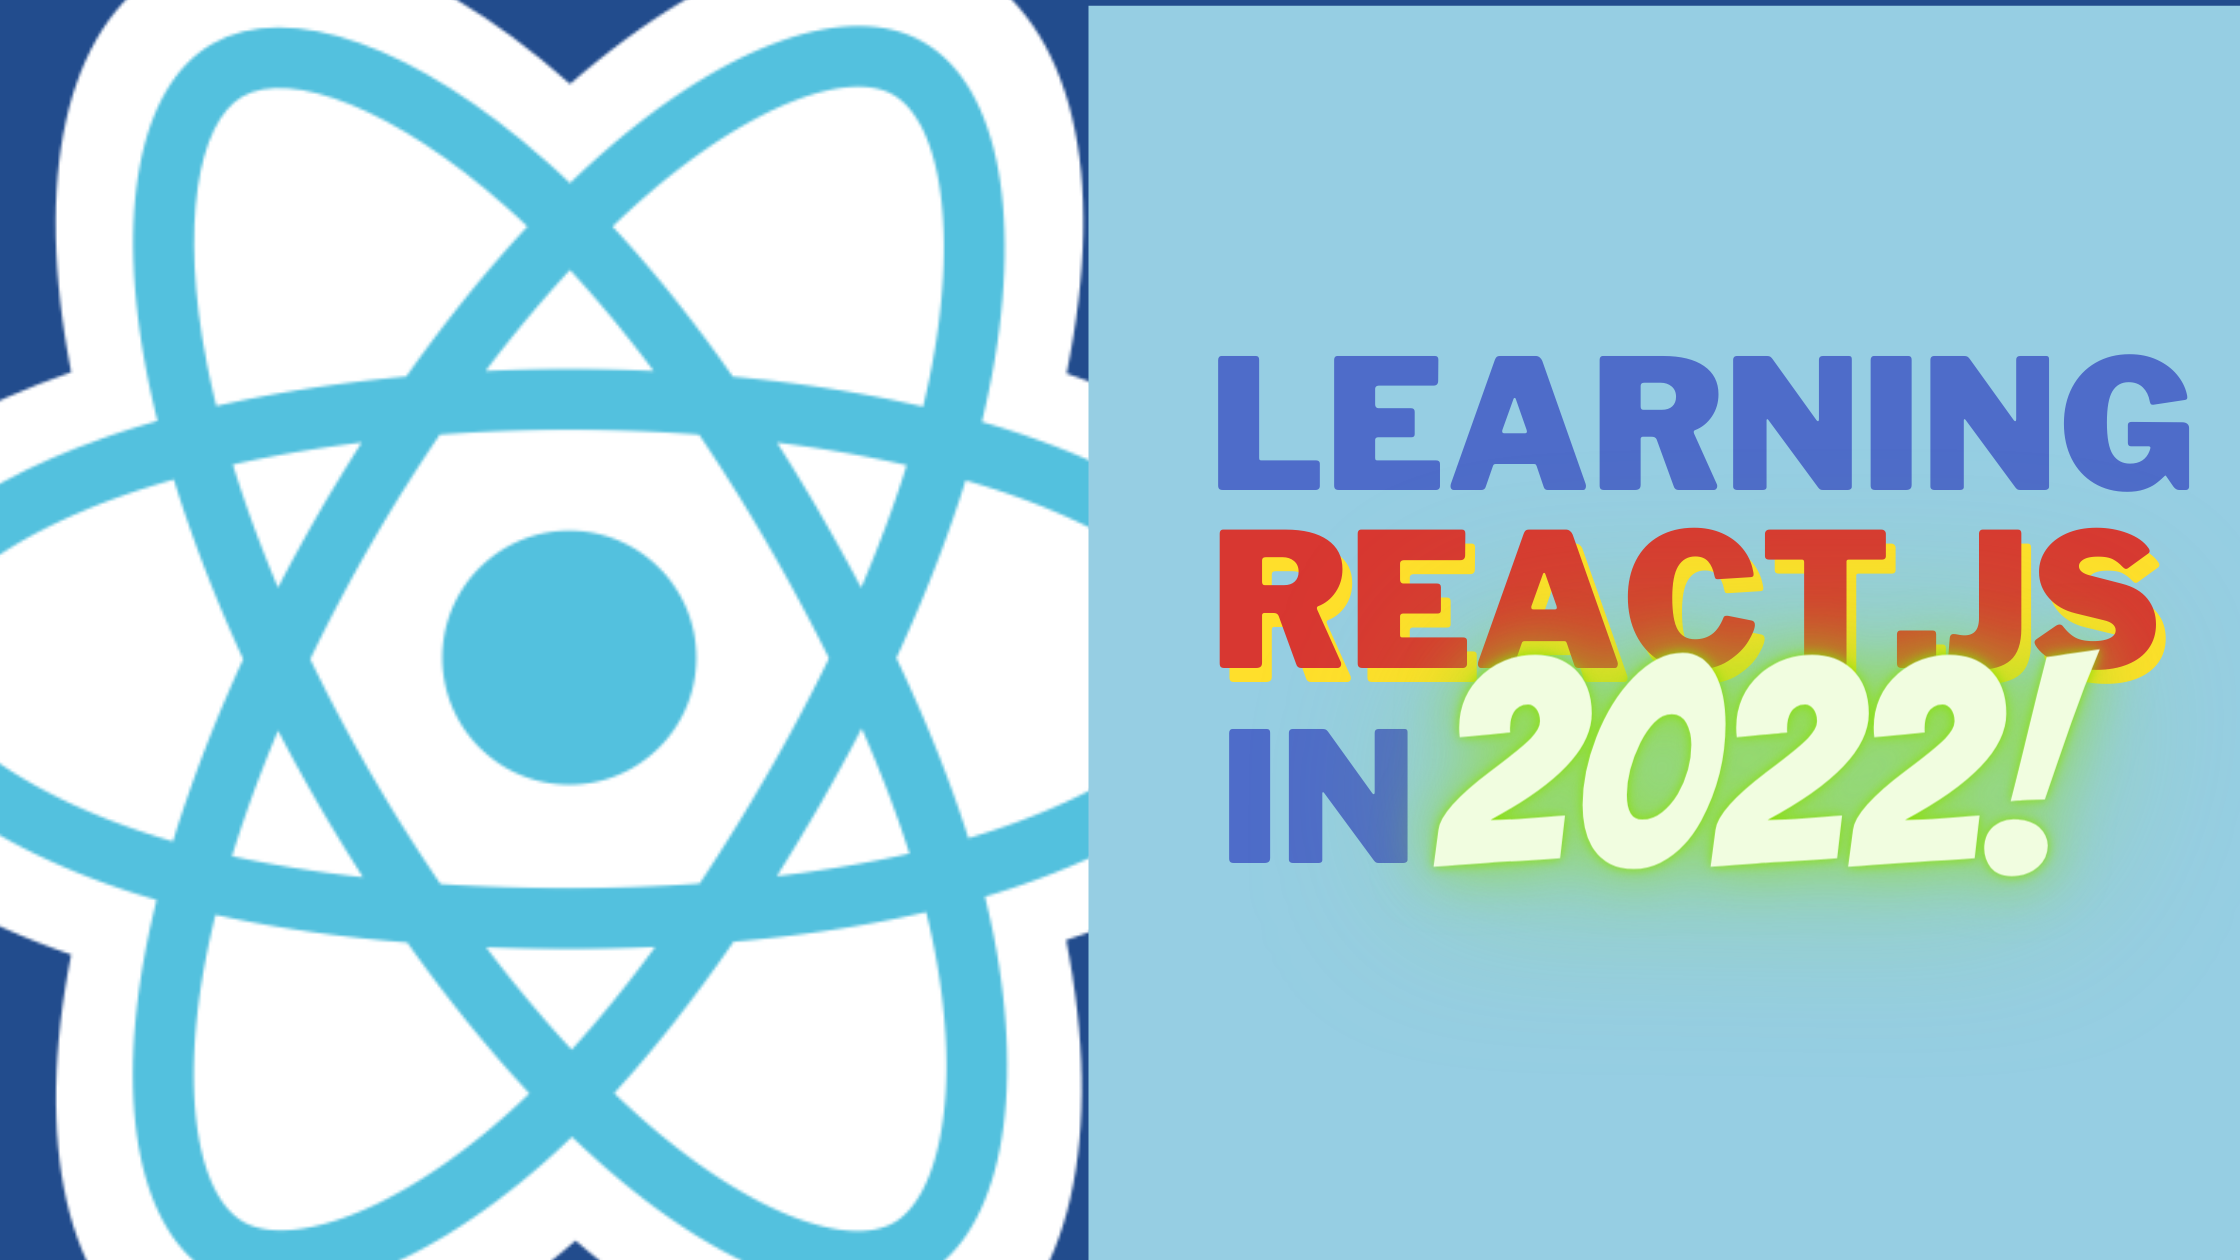 Where to Learn React.JS in 2022 - A List of Resources for New Developers